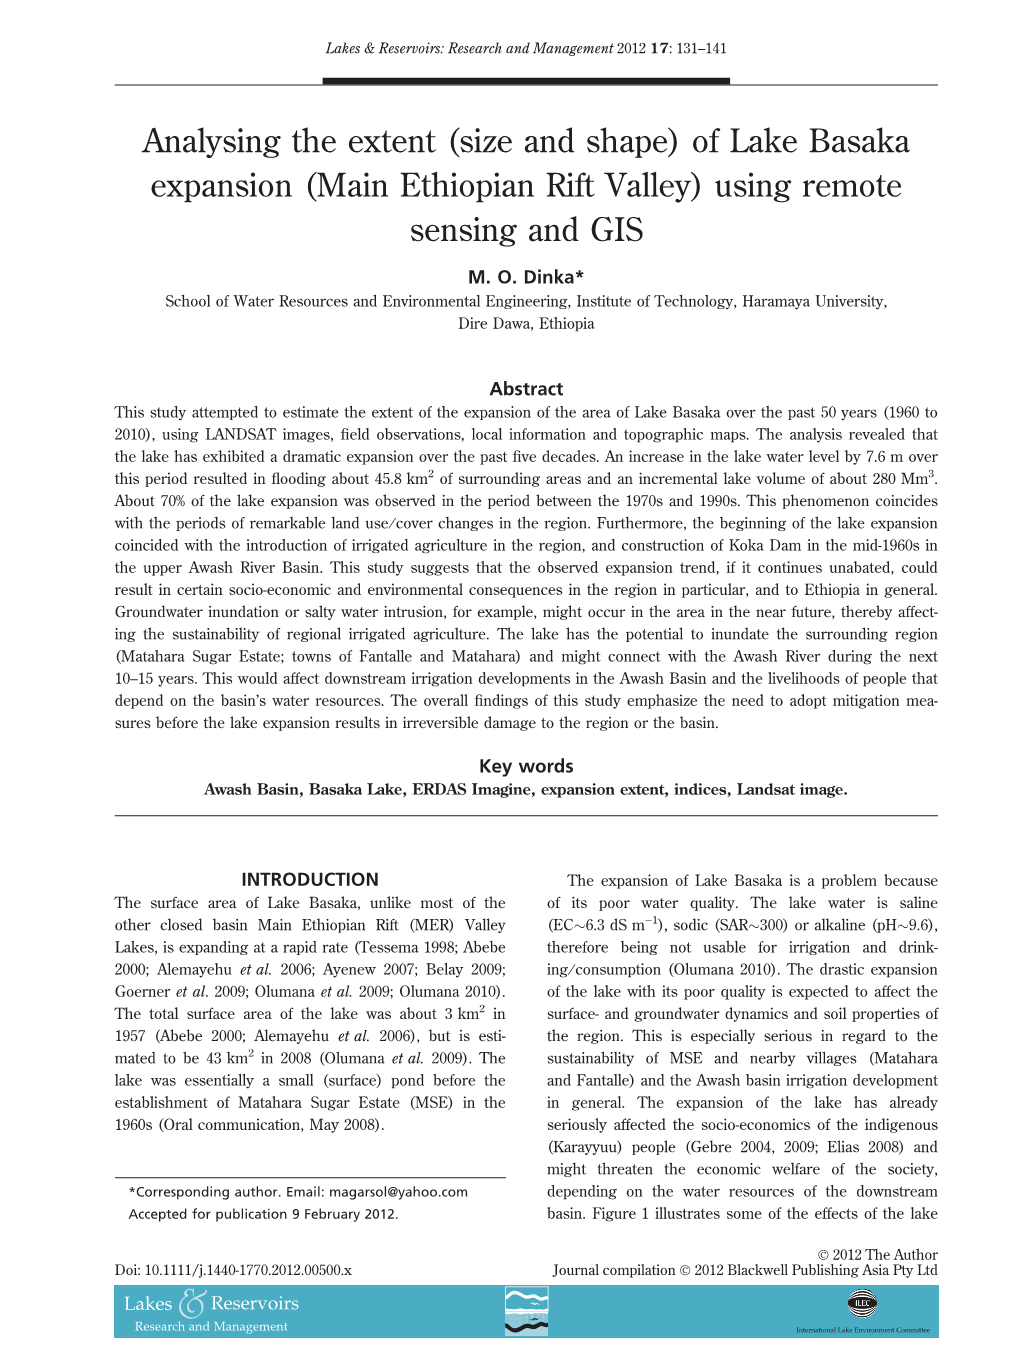 Analysing the Extent (Size and Shape) of Lake Basaka Expansion (Main Ethiopian Rift Valley) Using Remote Sensing and GIS